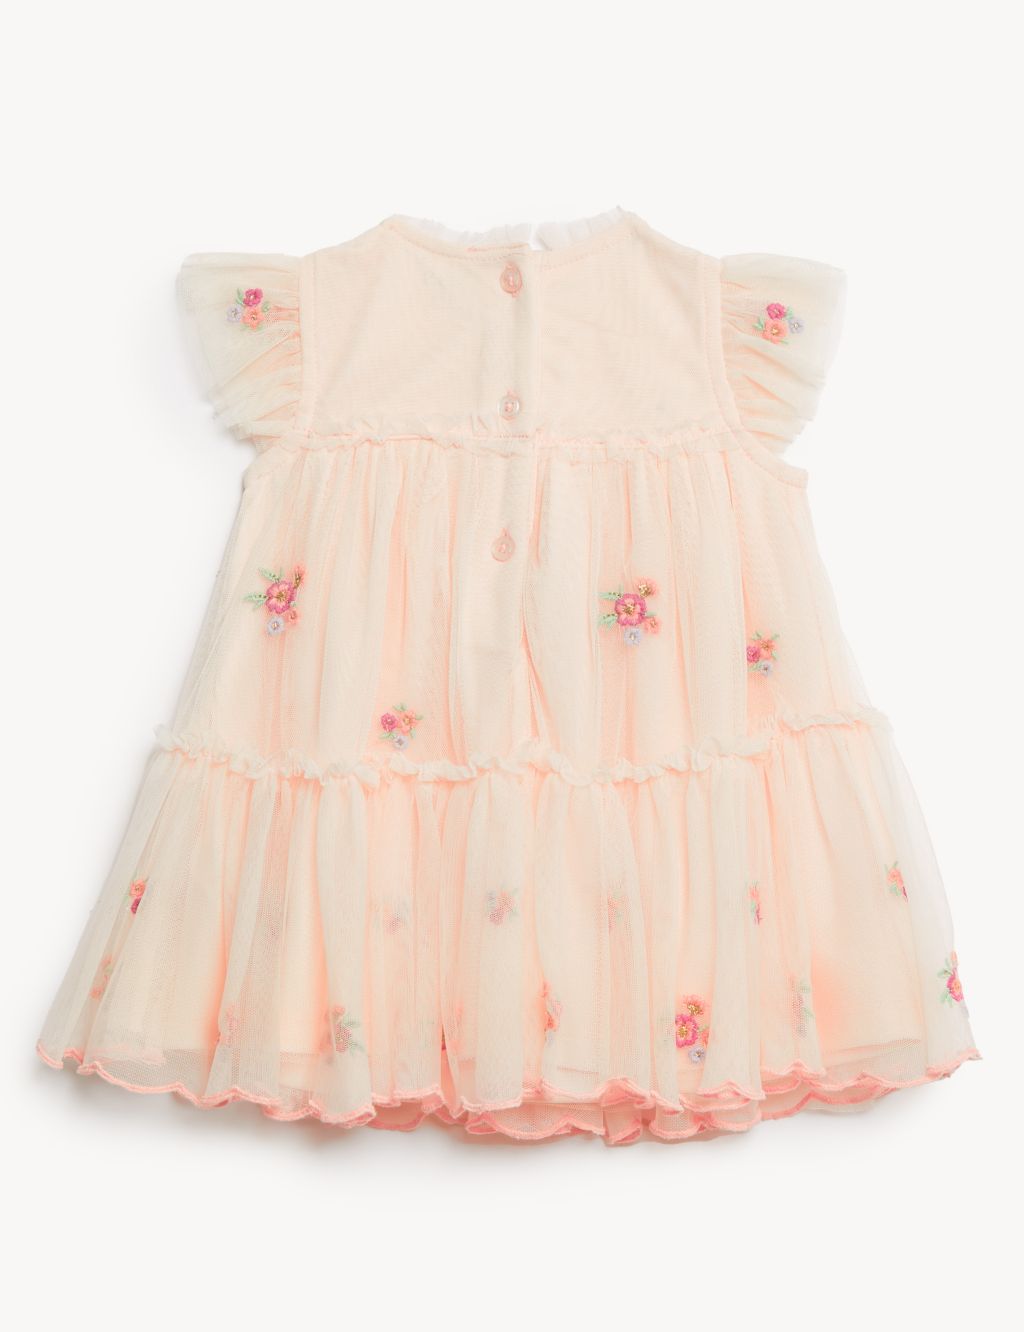 Tulle Floral Embroidered Dress (0-3 Yrs) image 2